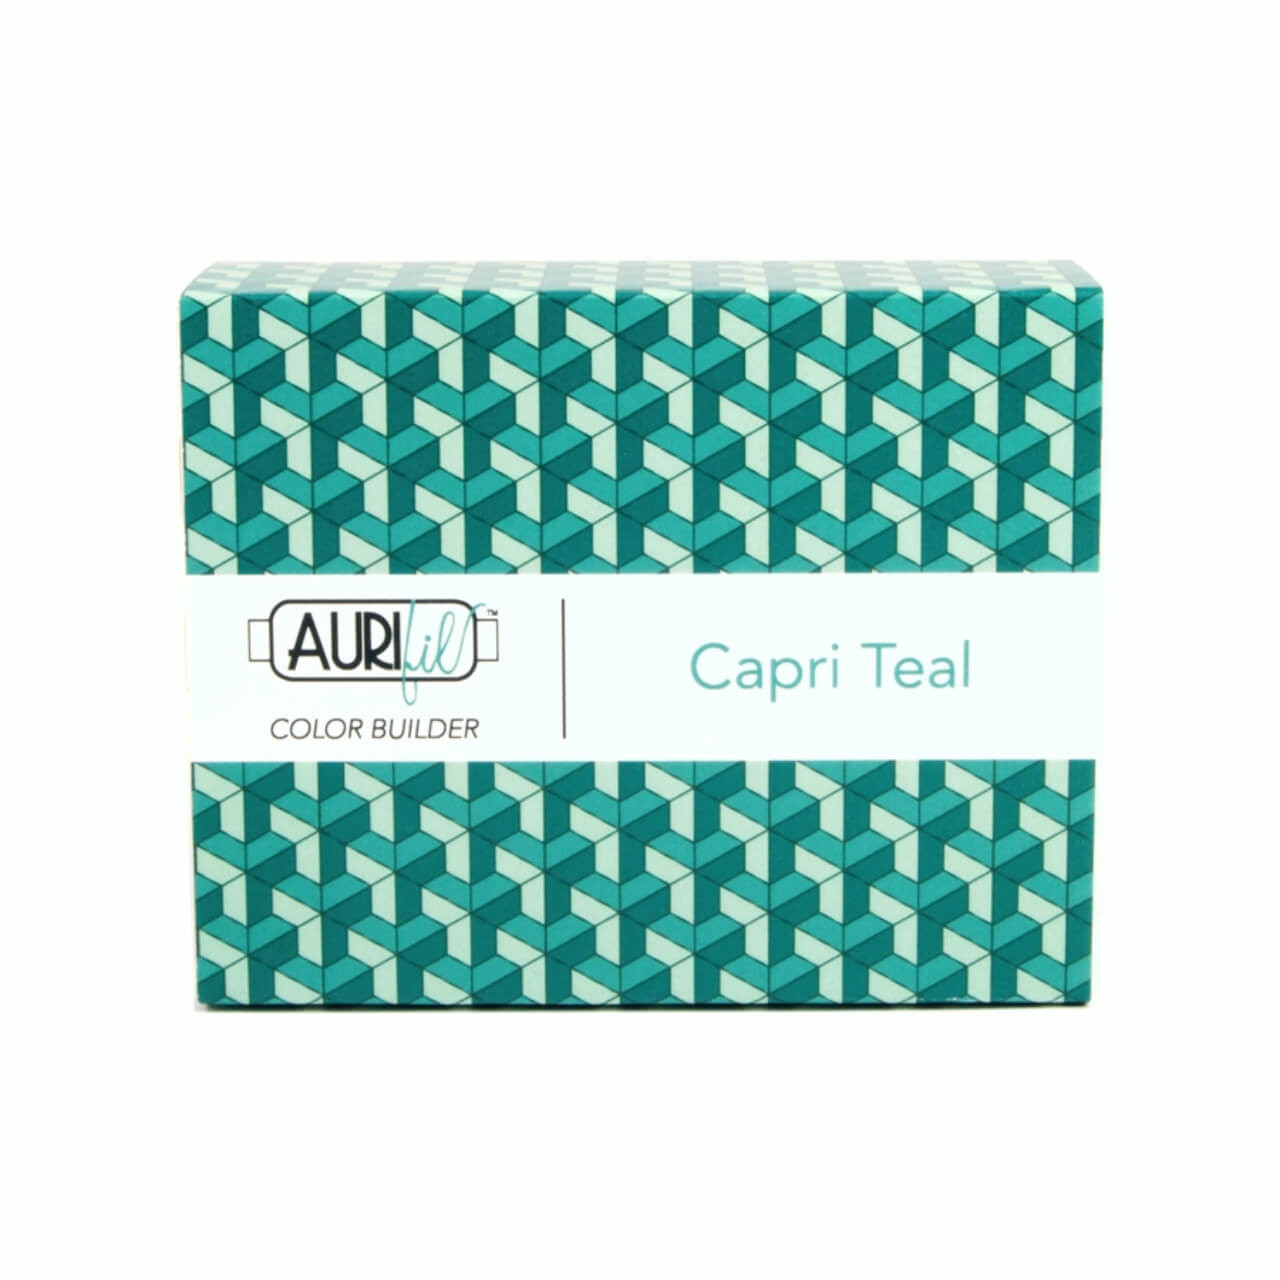 Packaging for Aurifil's Capri Teal Color Builder, showcasing a dynamic geometric pattern in varying shades of teal, with the Aurifil logo and the product name "Capri Teal" clearly displayed on the label.